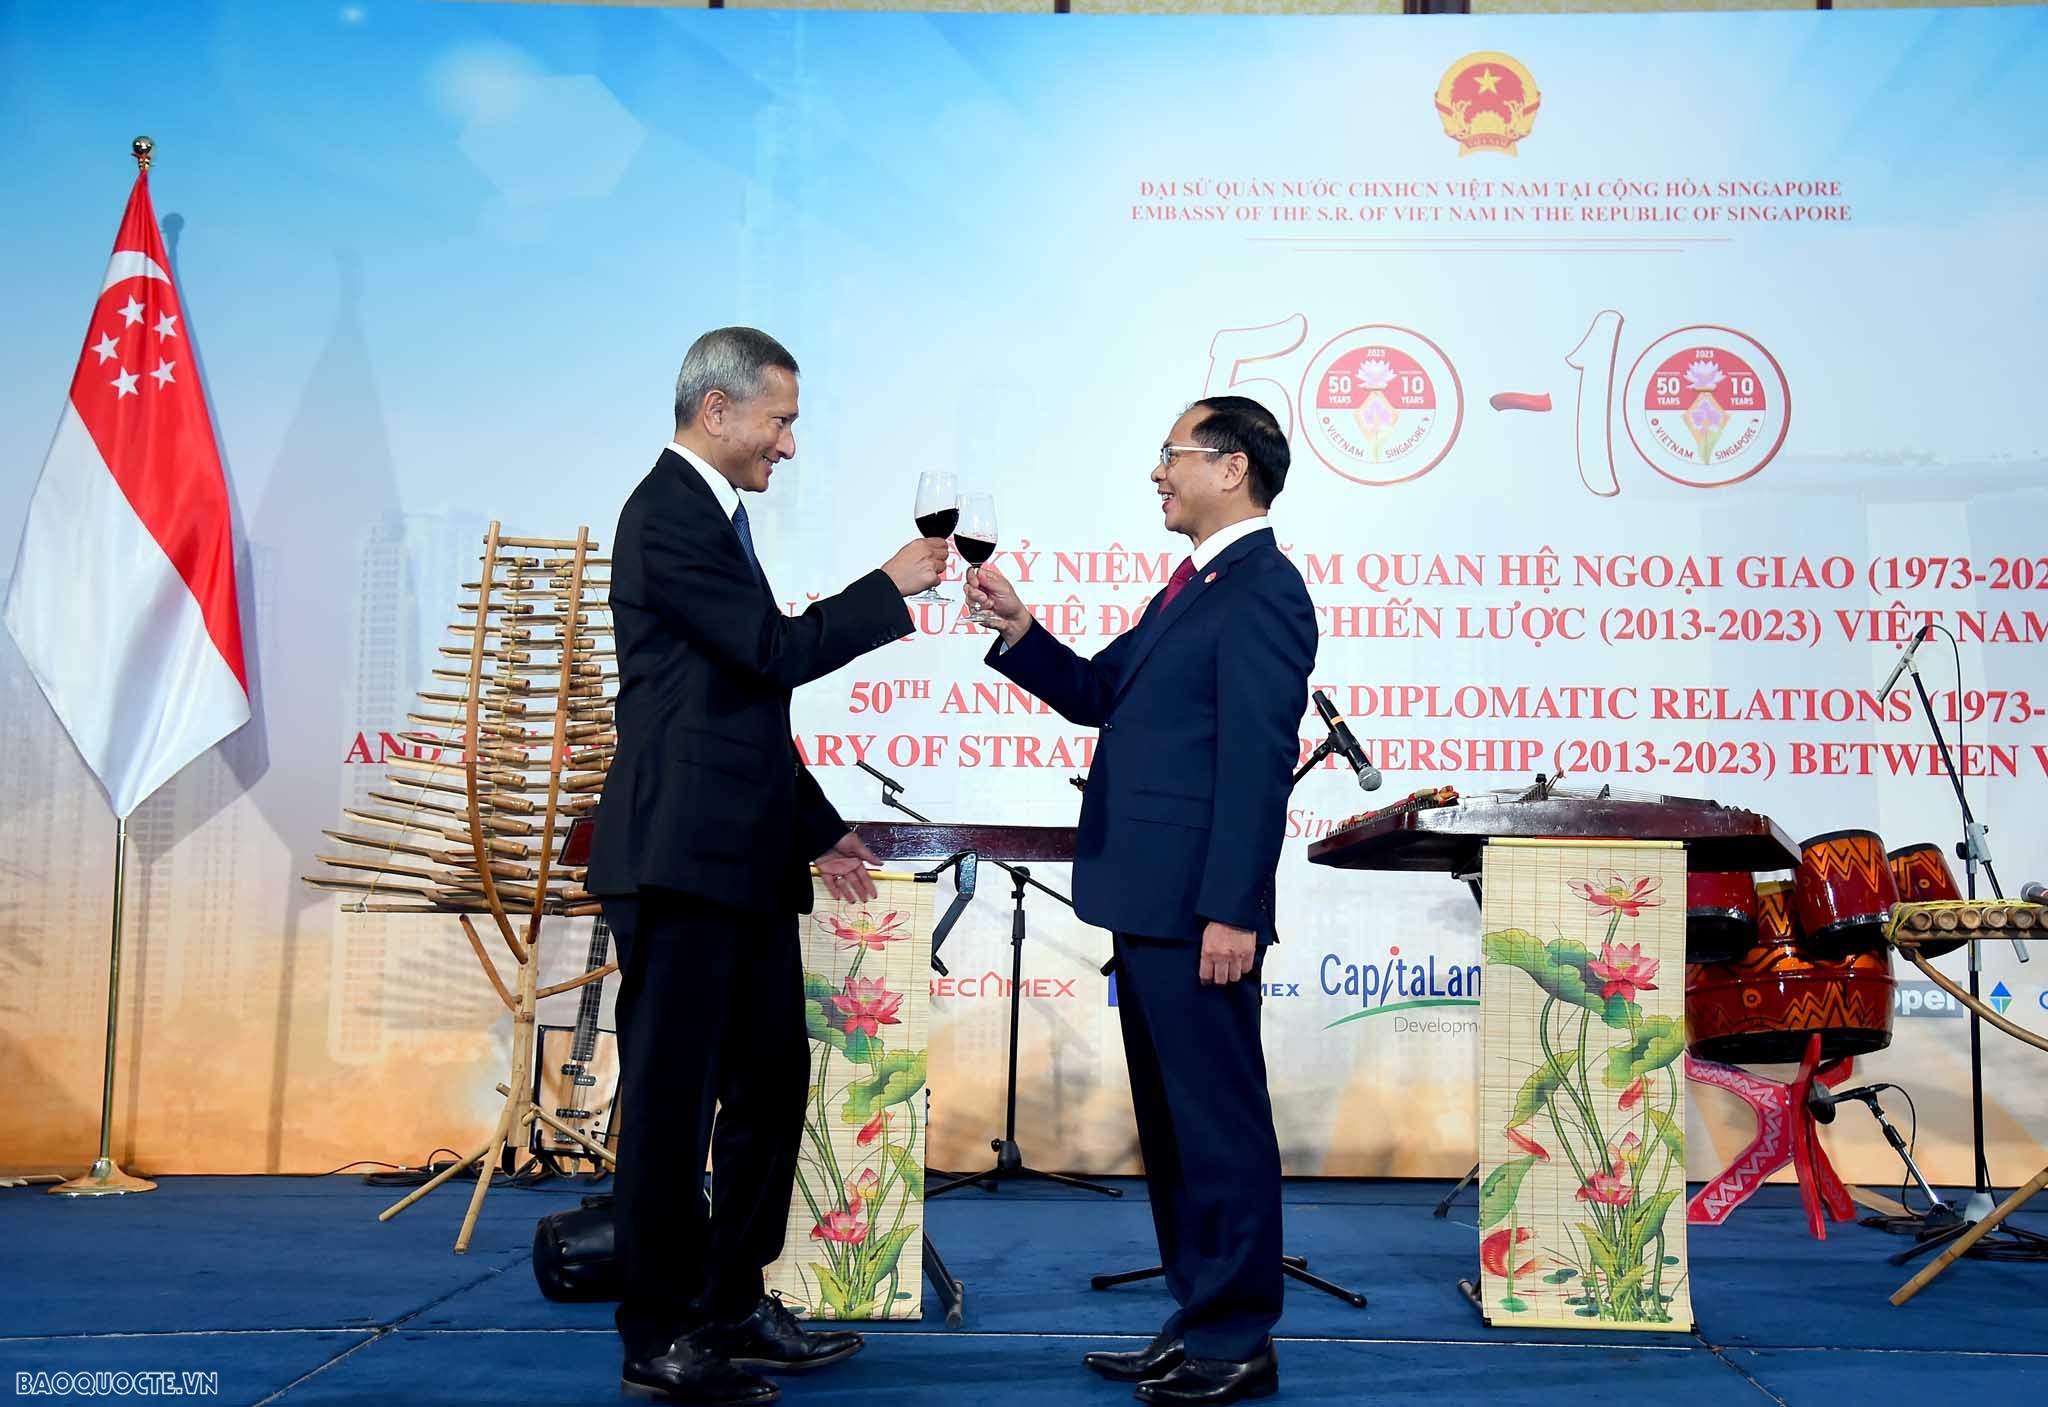 Vietnam, Singapore FMs attended ceremony marking 50th anniversary of diplomatic ties